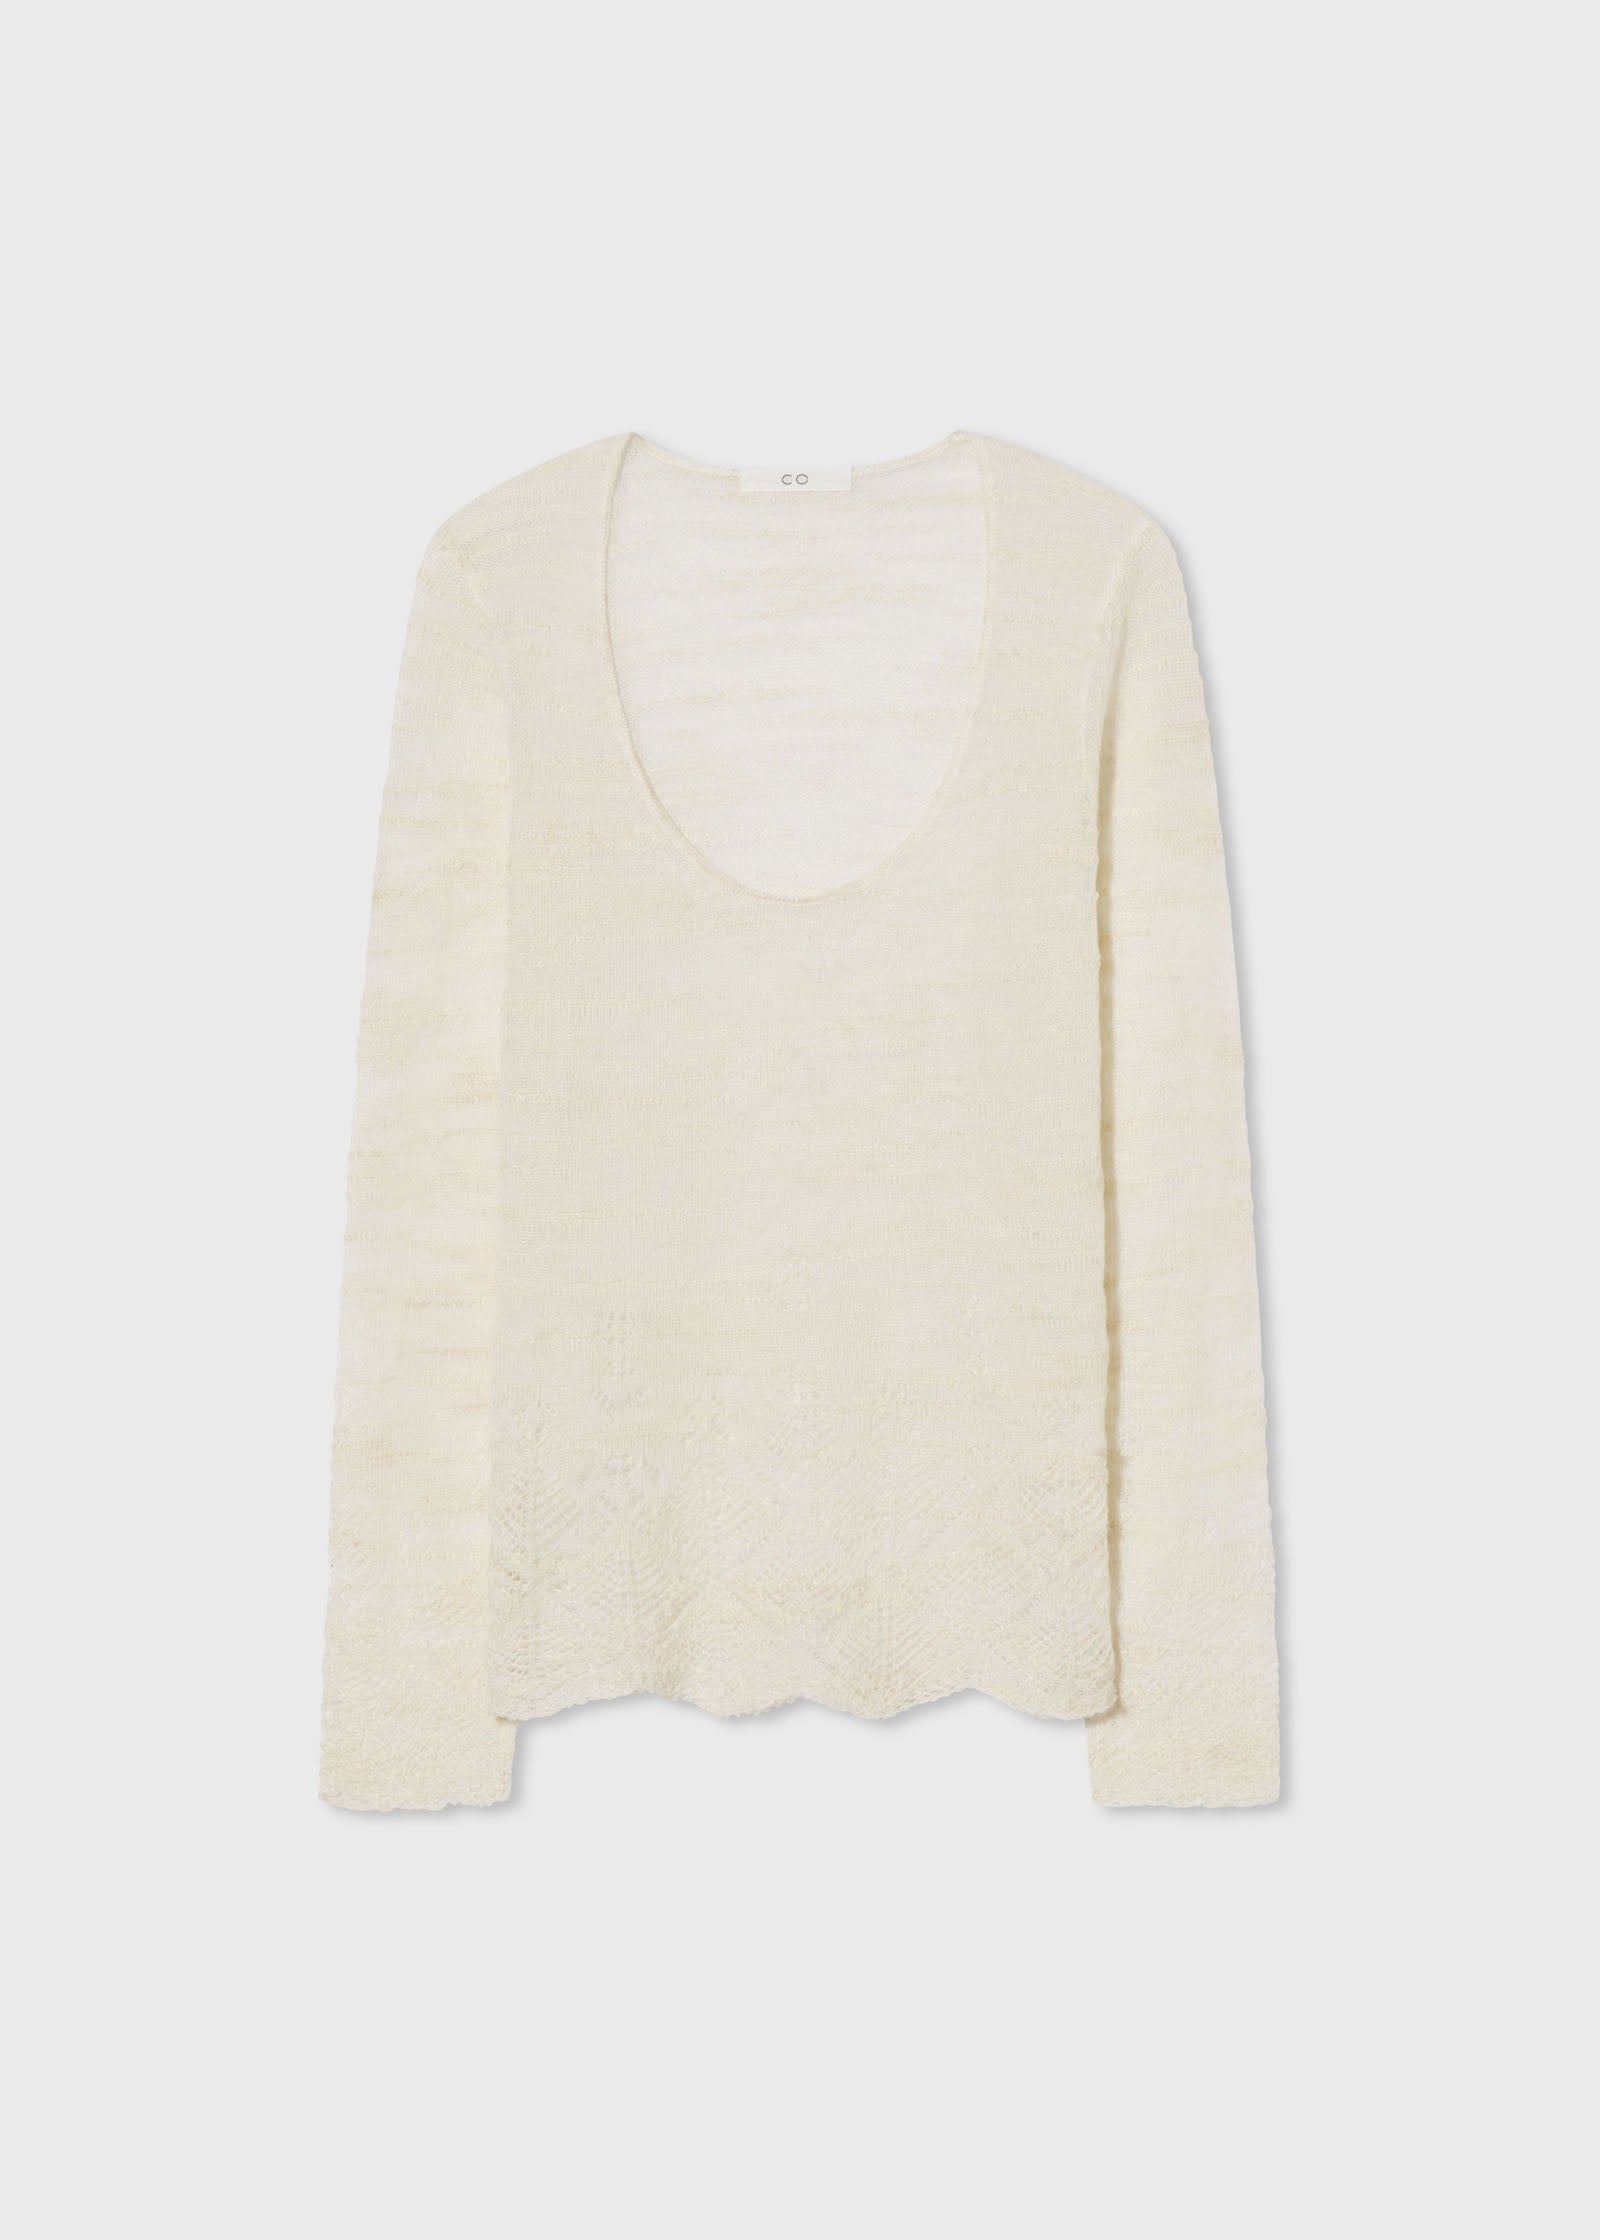 Open Weave Scoop Neck Knit Top in Wool - Ivory - CO Collections